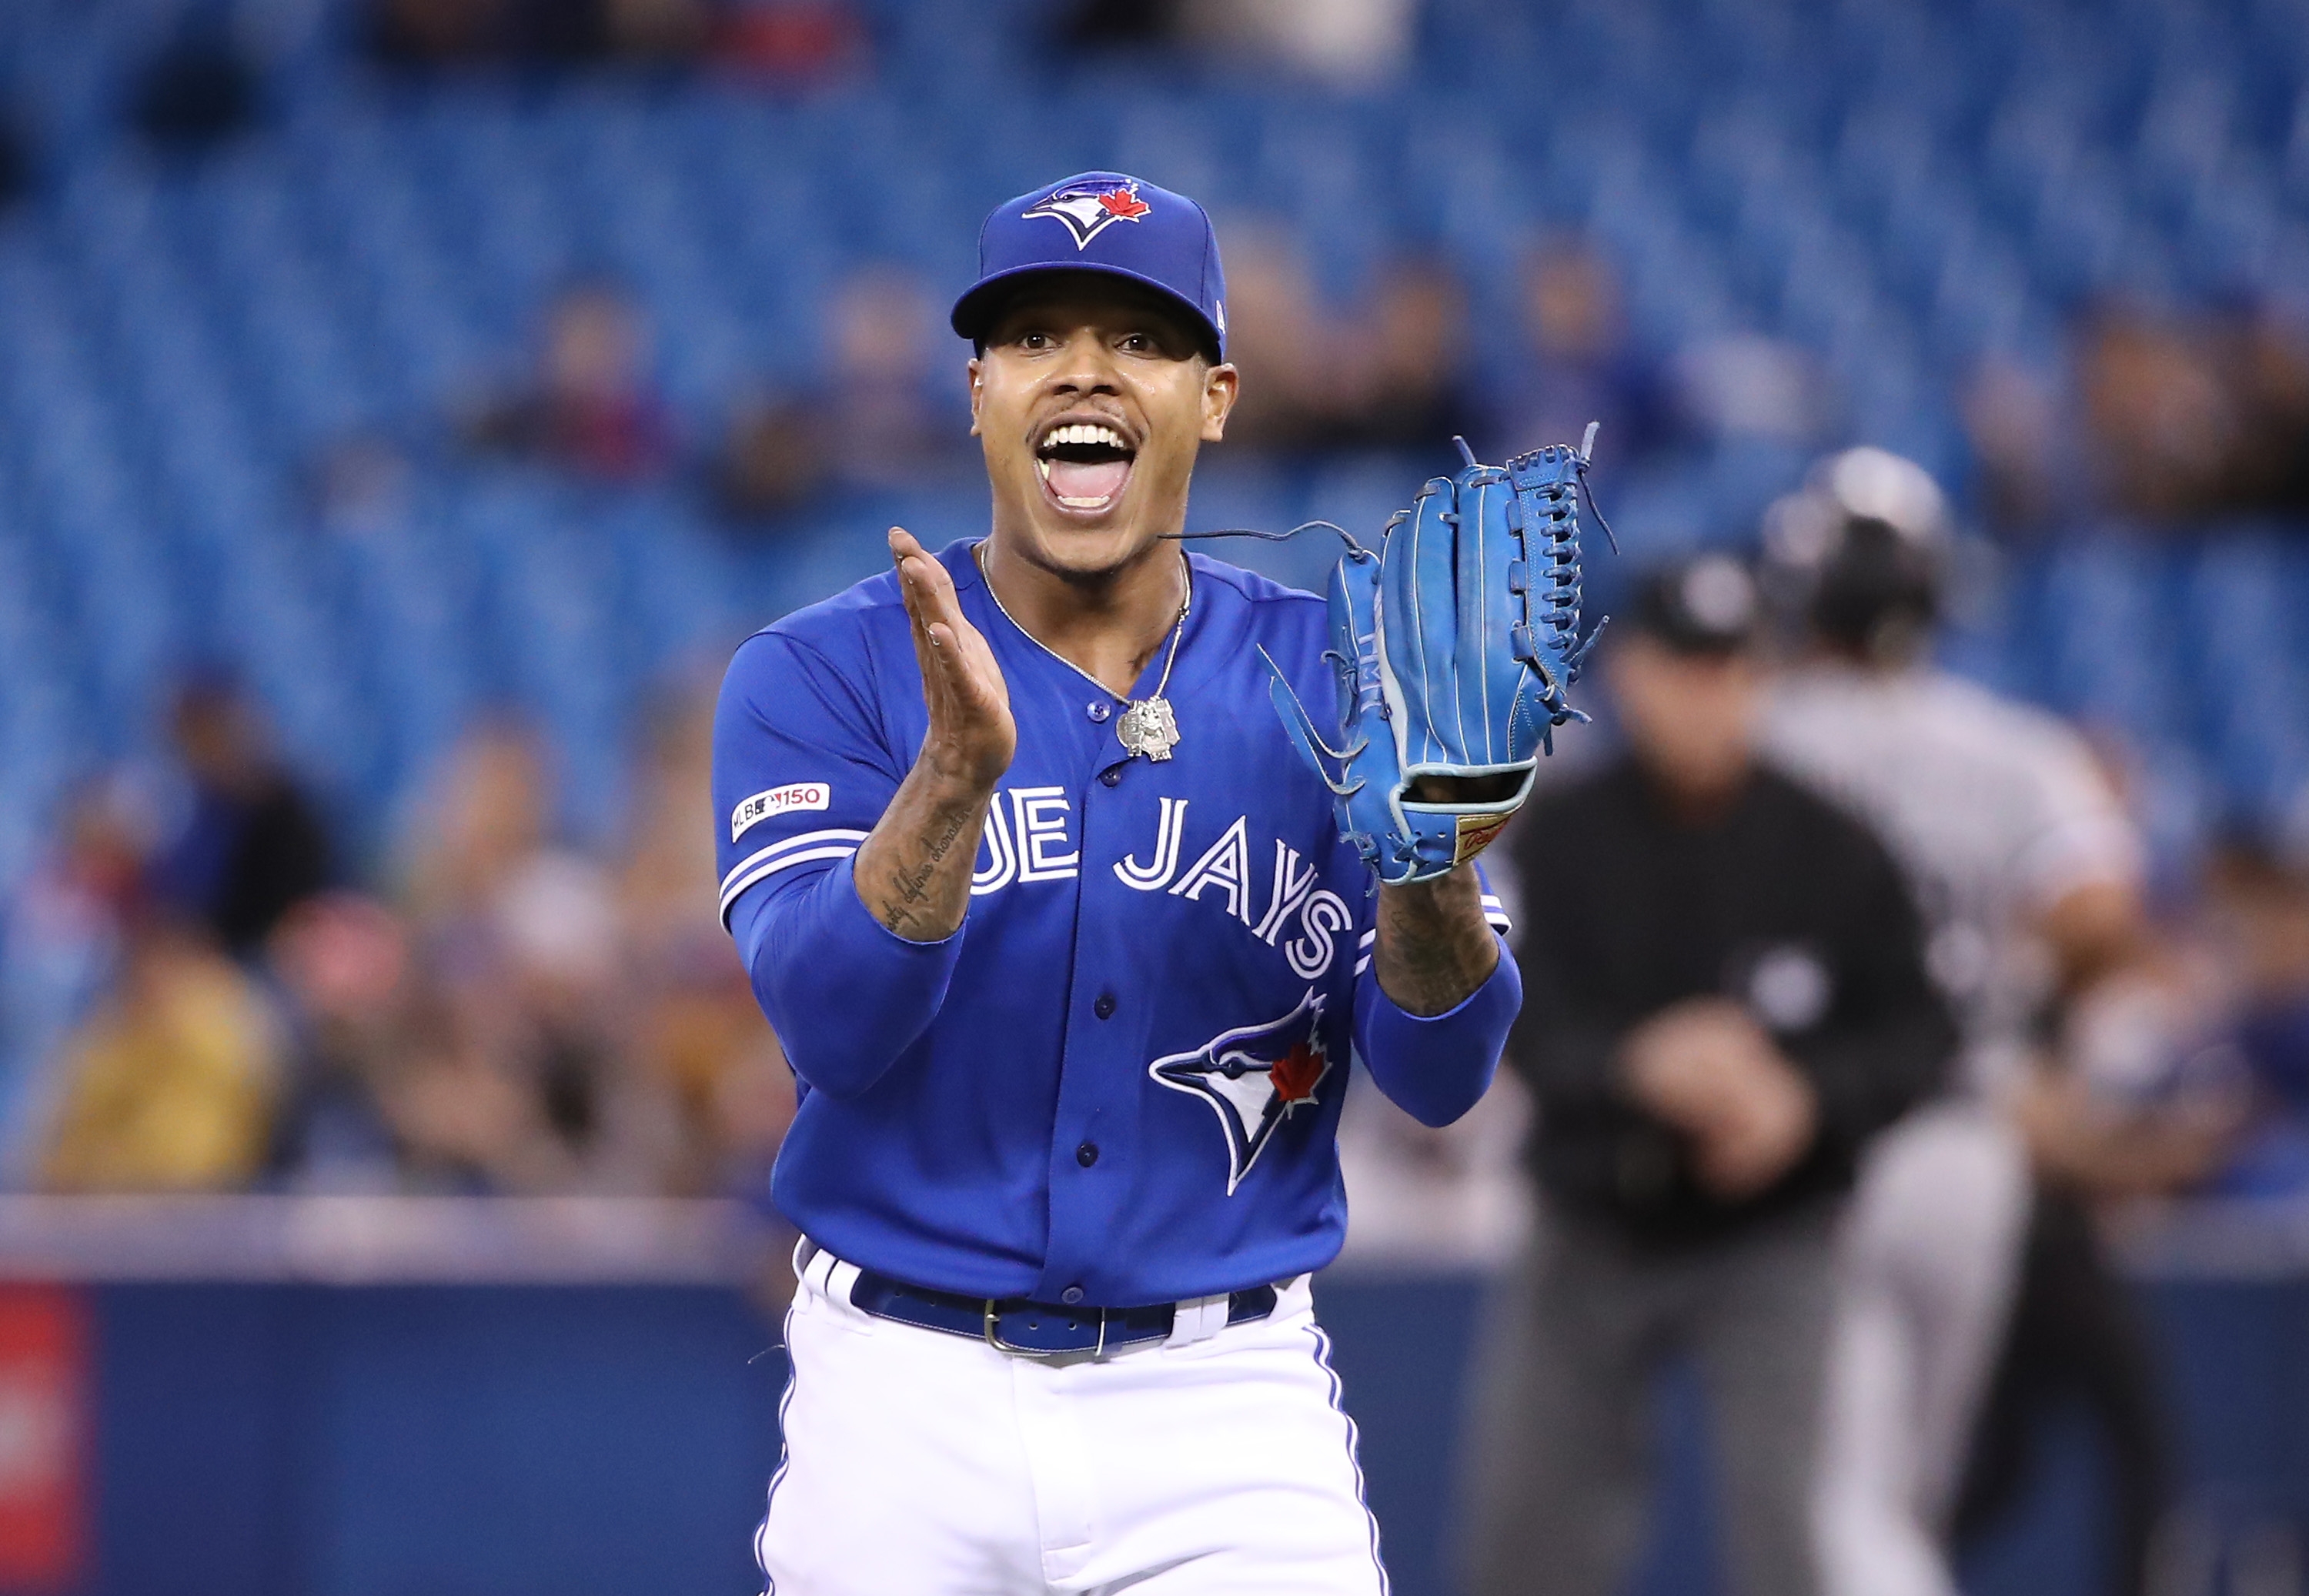 SHOW'S OVER: Jays management determined that Stroman had to go ...